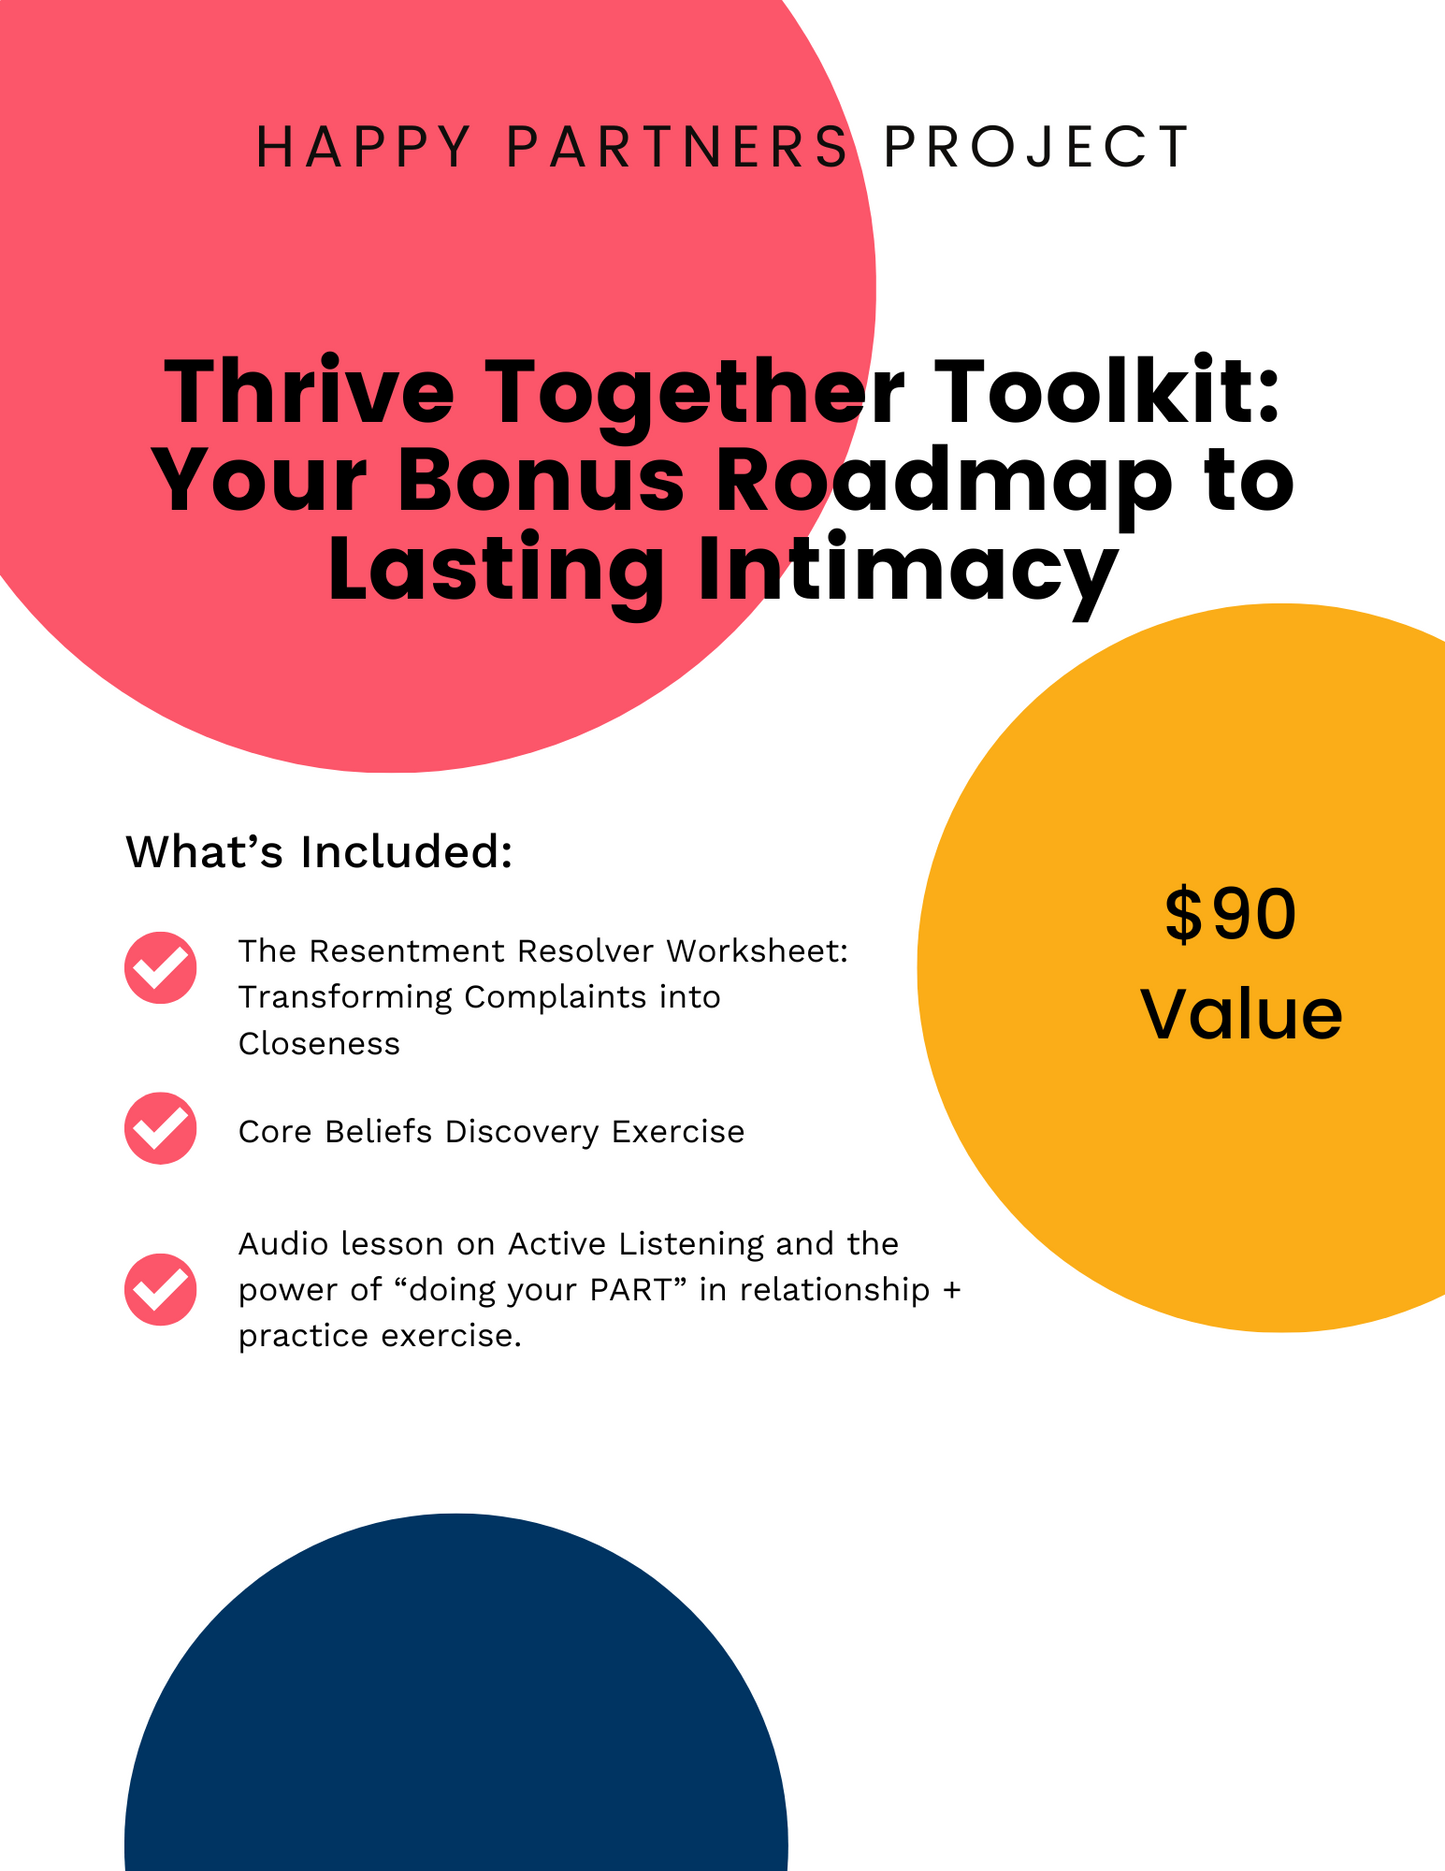 Thrive Together Toolkit: Your Bonus Roadmap to Lasting Intimacy